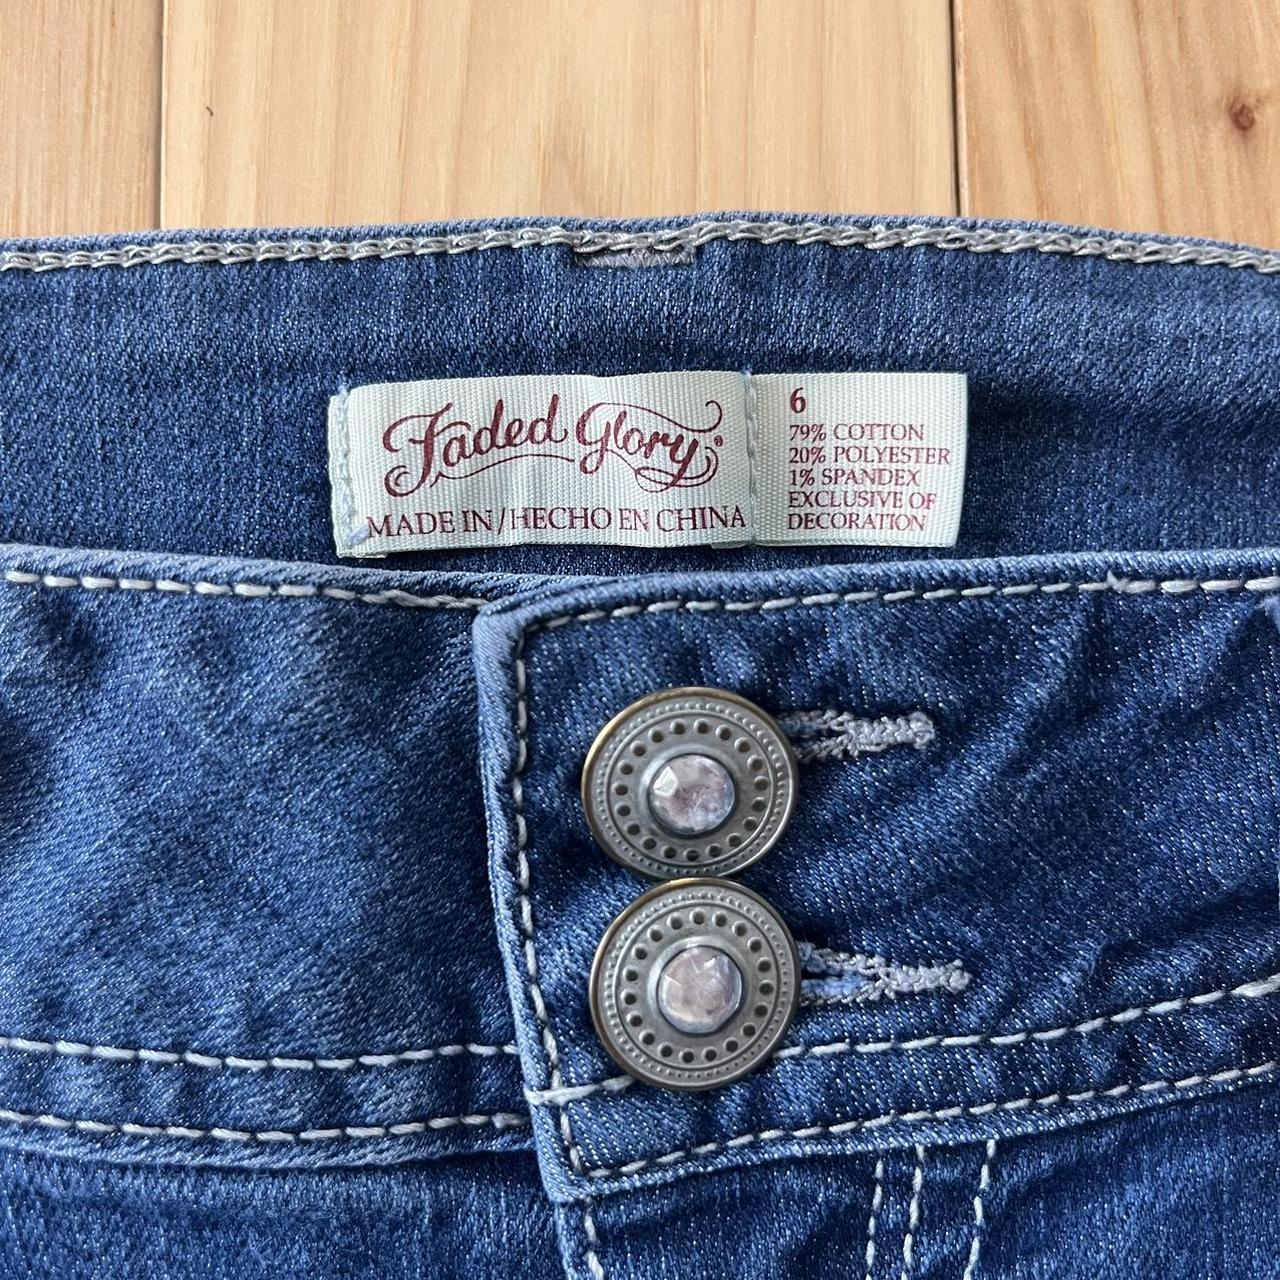 Faded Glory Jeggings. Size 4P. Well worn but still - Depop